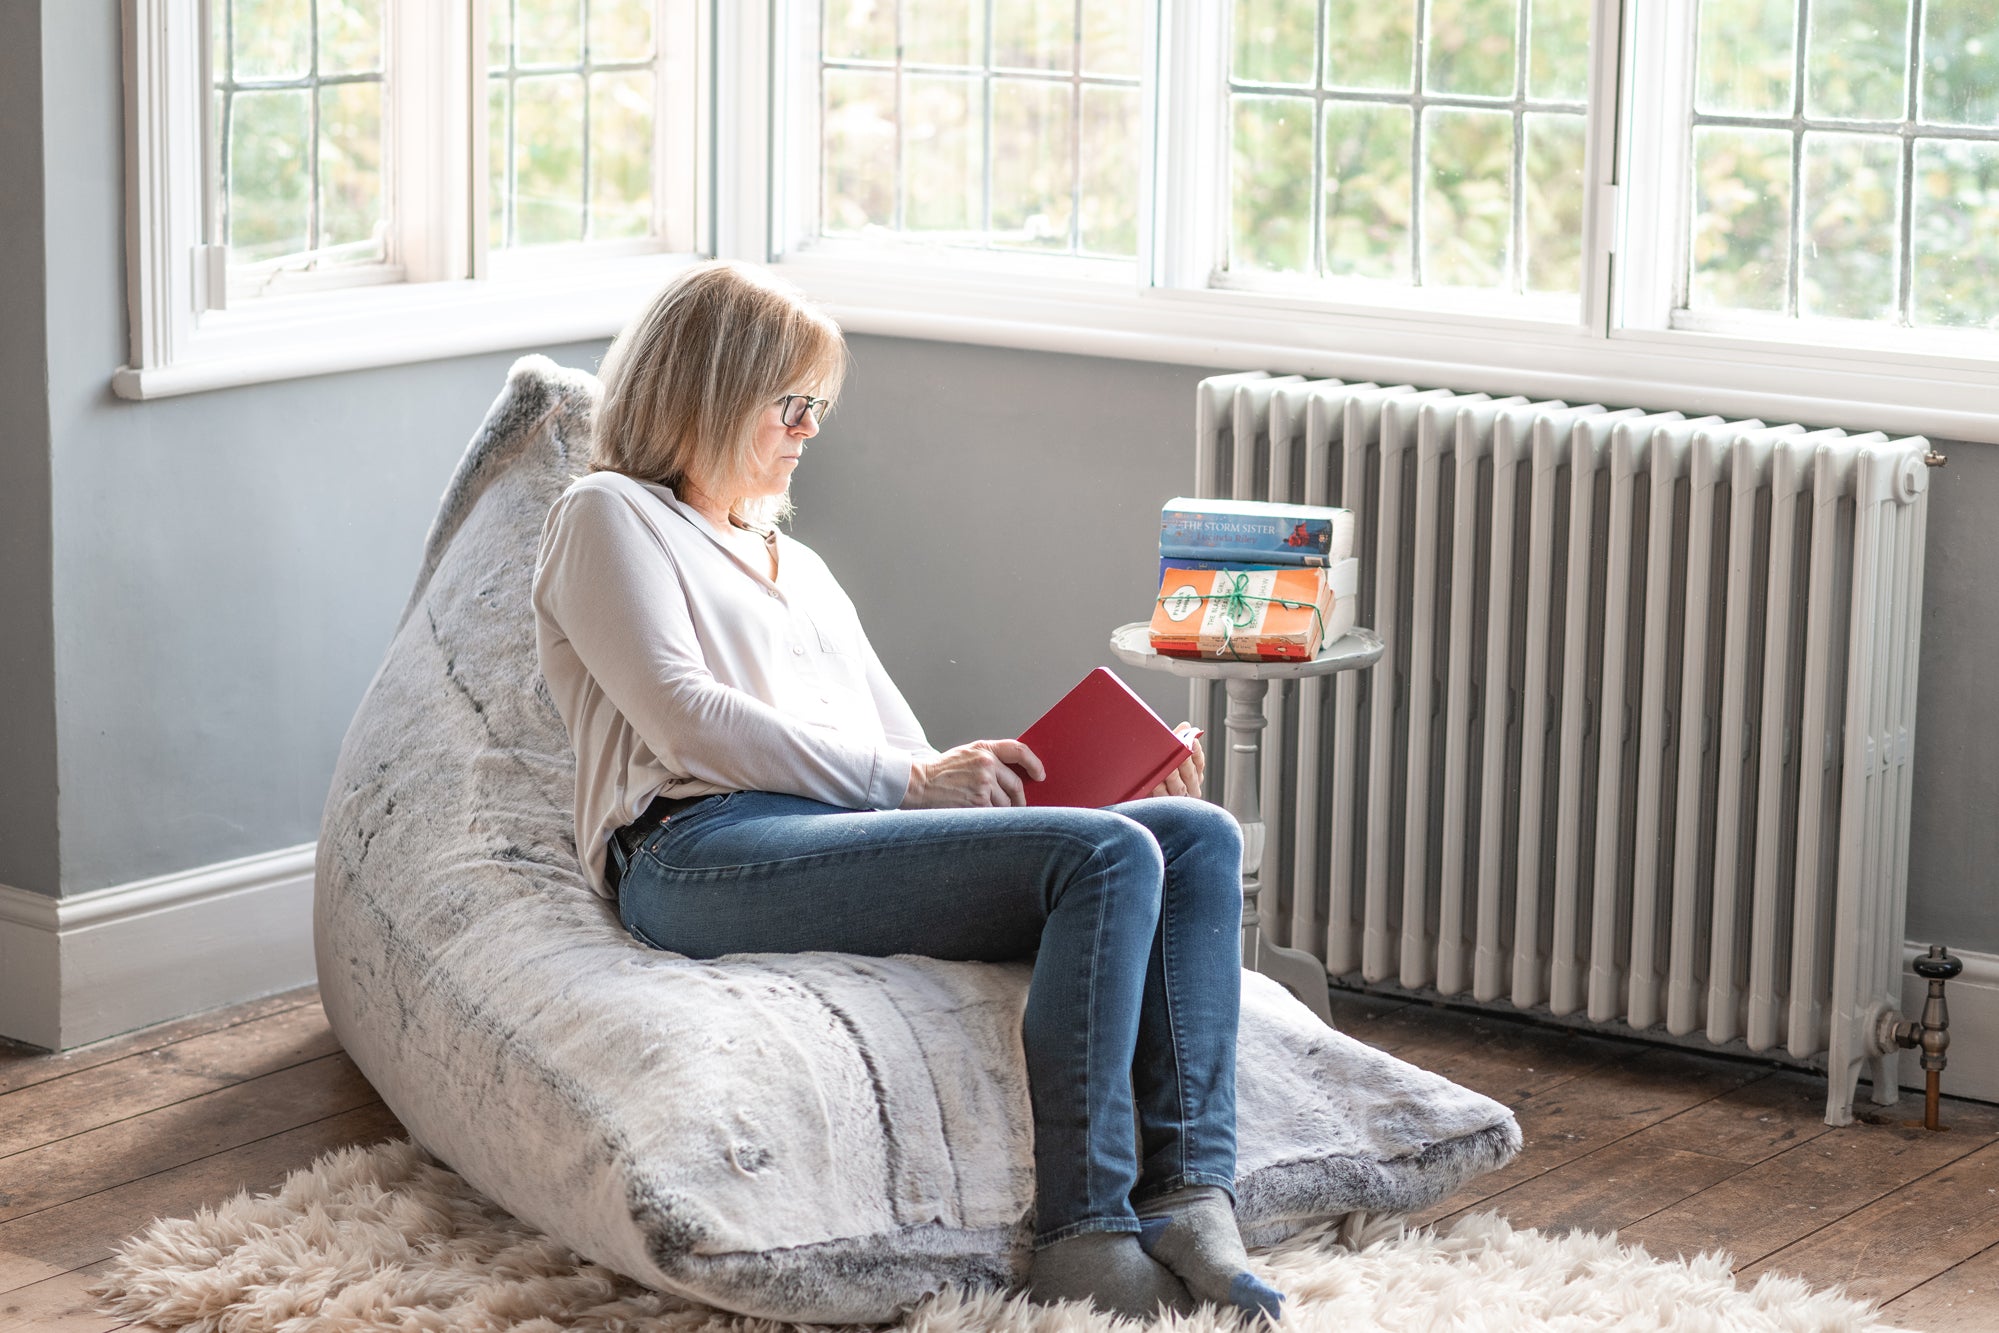 A snuggly faux fur bean bag in Alaska Fox is the cosiest reading corner for the woman snuggled into it with her pile of books